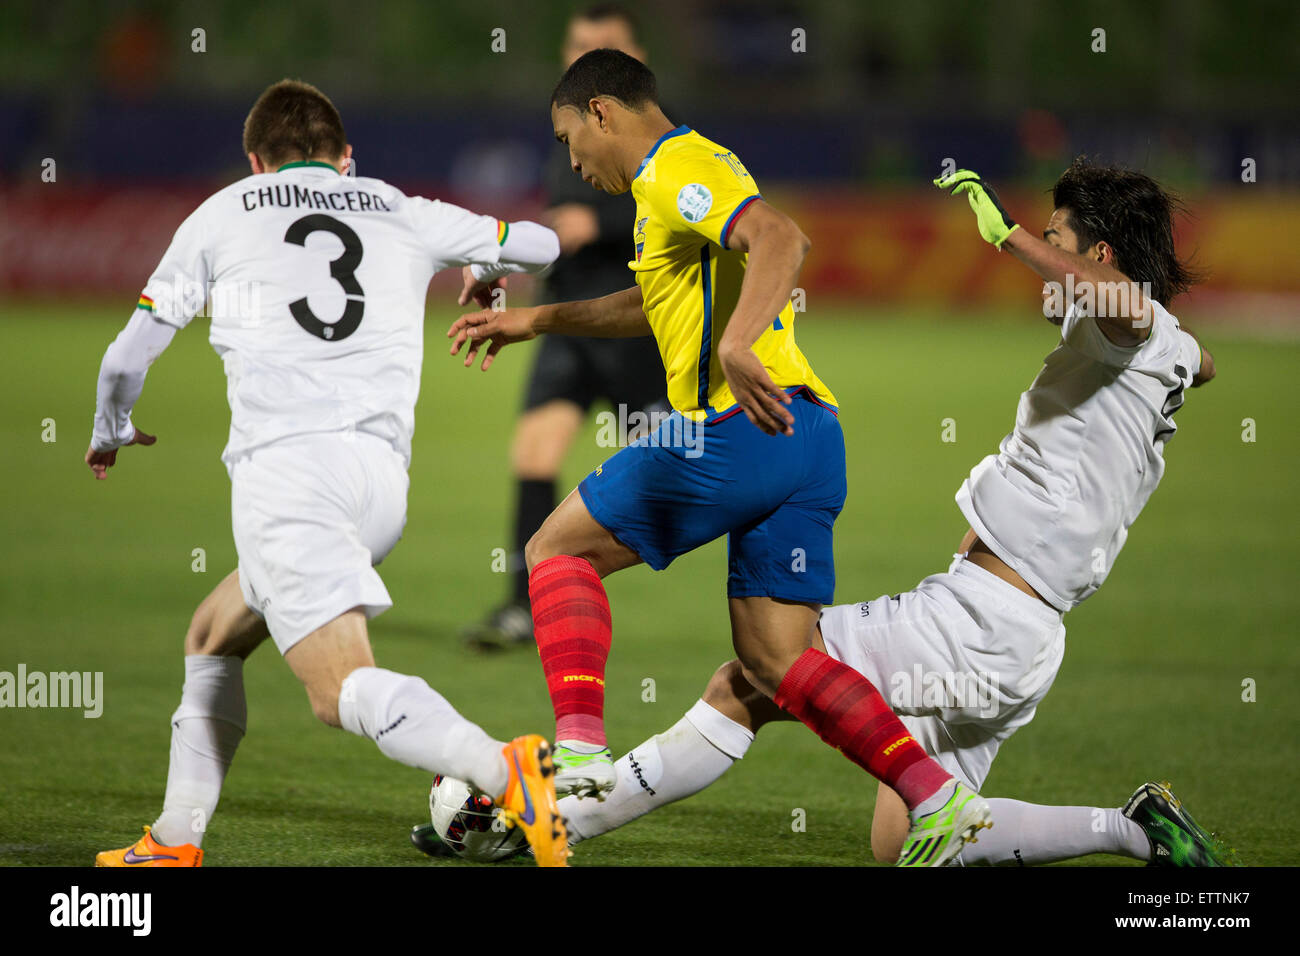 Valparaiso, Chile. 15th June, 2015. Jefferson Montero (C) of Ecuador vies for the ball with Alejandro Chumacero (L) of Bolivia during the Group A match of the Copa America, held at the Elias Figueroa Brander stadium, in Valparaiso, Chile, on June 15, 2015. Bolivia won 3-2. © Luis Echeverria/Xinhua/Alamy Live News Stock Photo